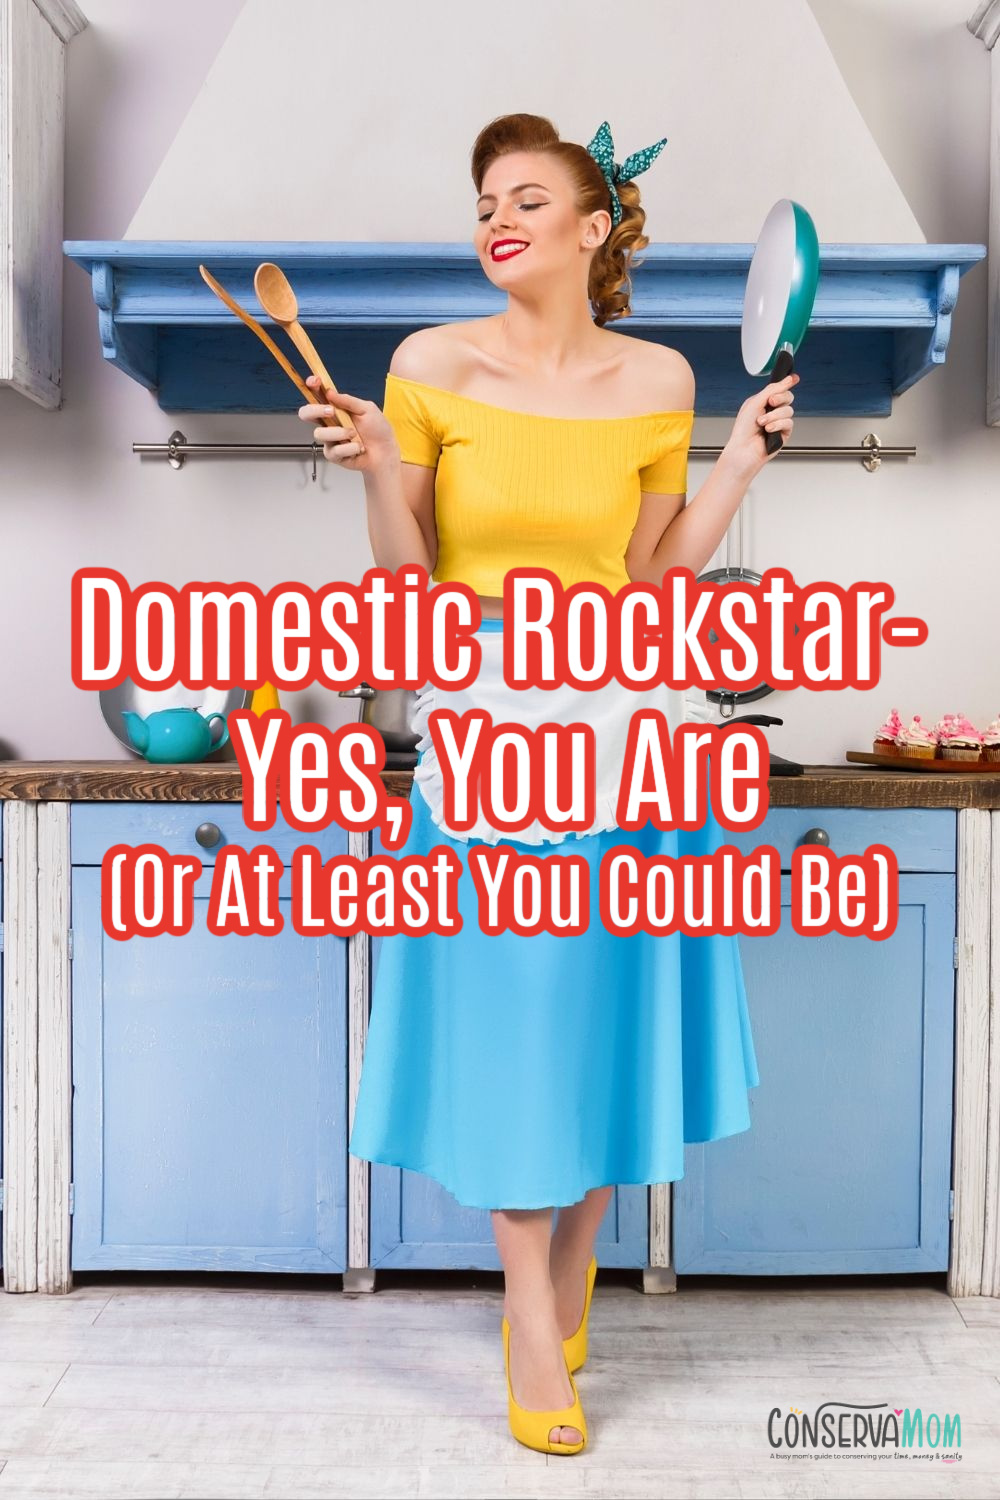 Domestic Rockstar- Yes, You Are (Or At Least You Could Be)